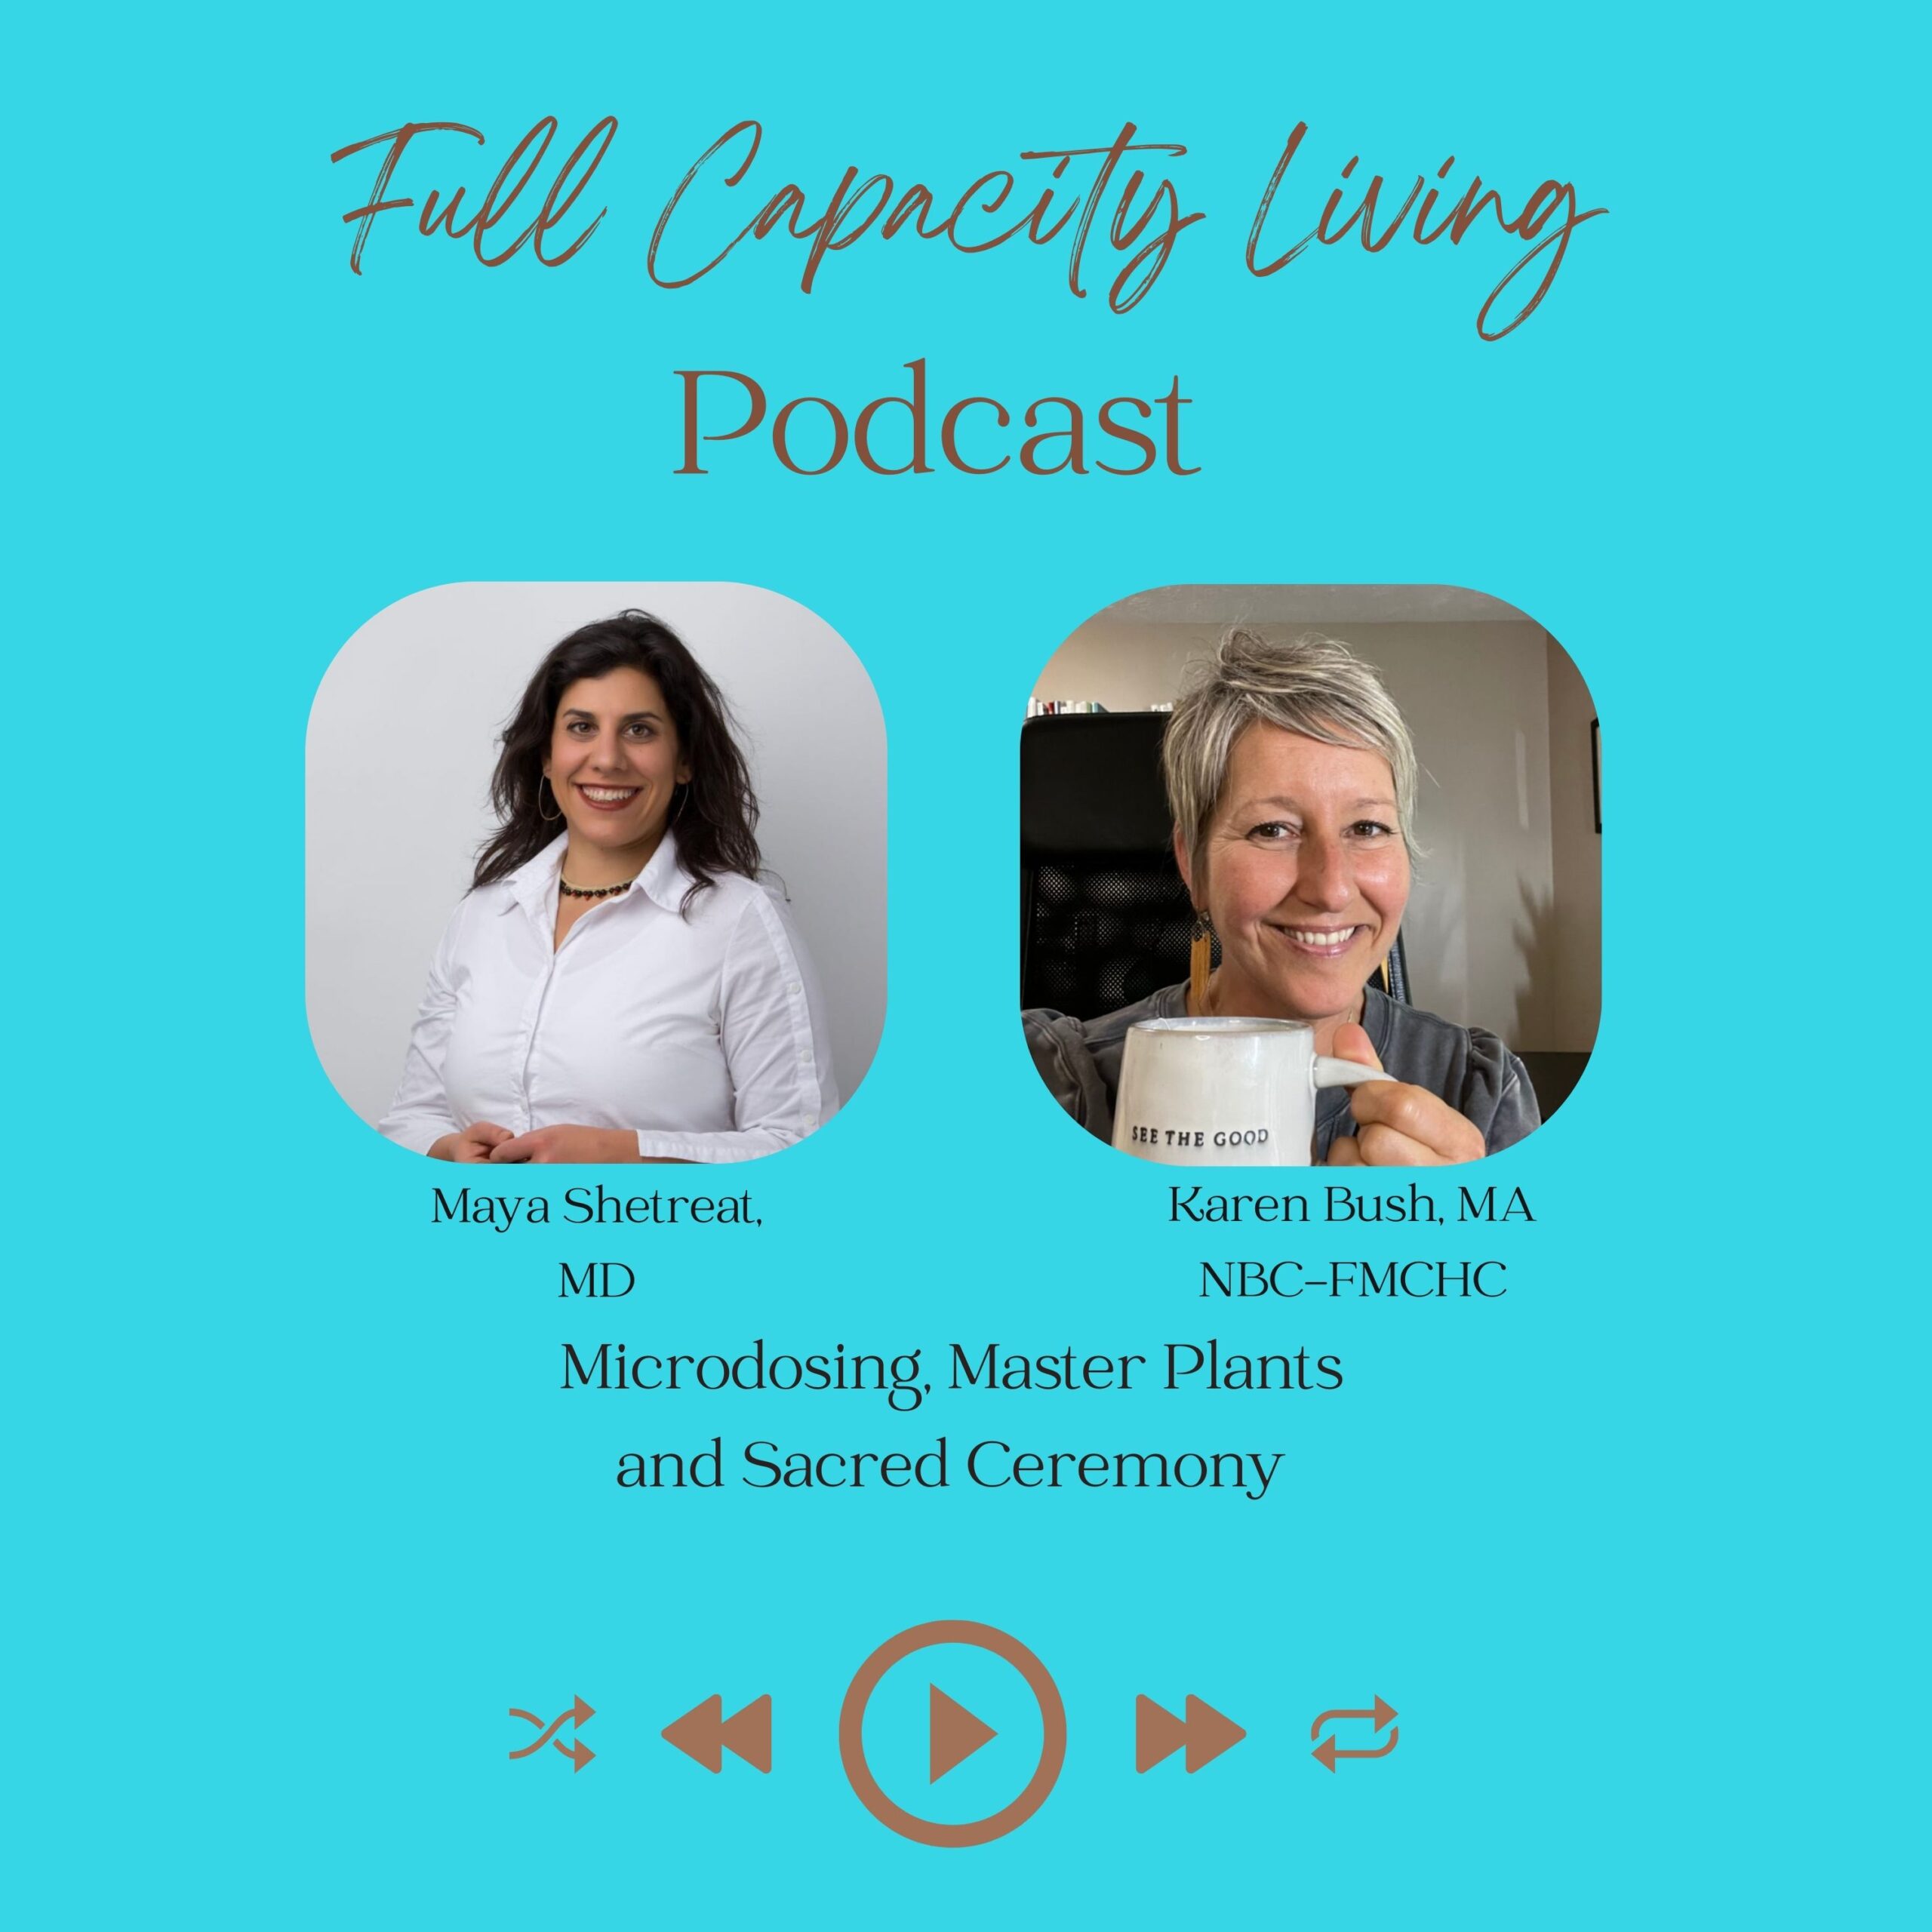 Microdosing, Master Plants and Sacred Ceremony with Dr. Maya Shetreat